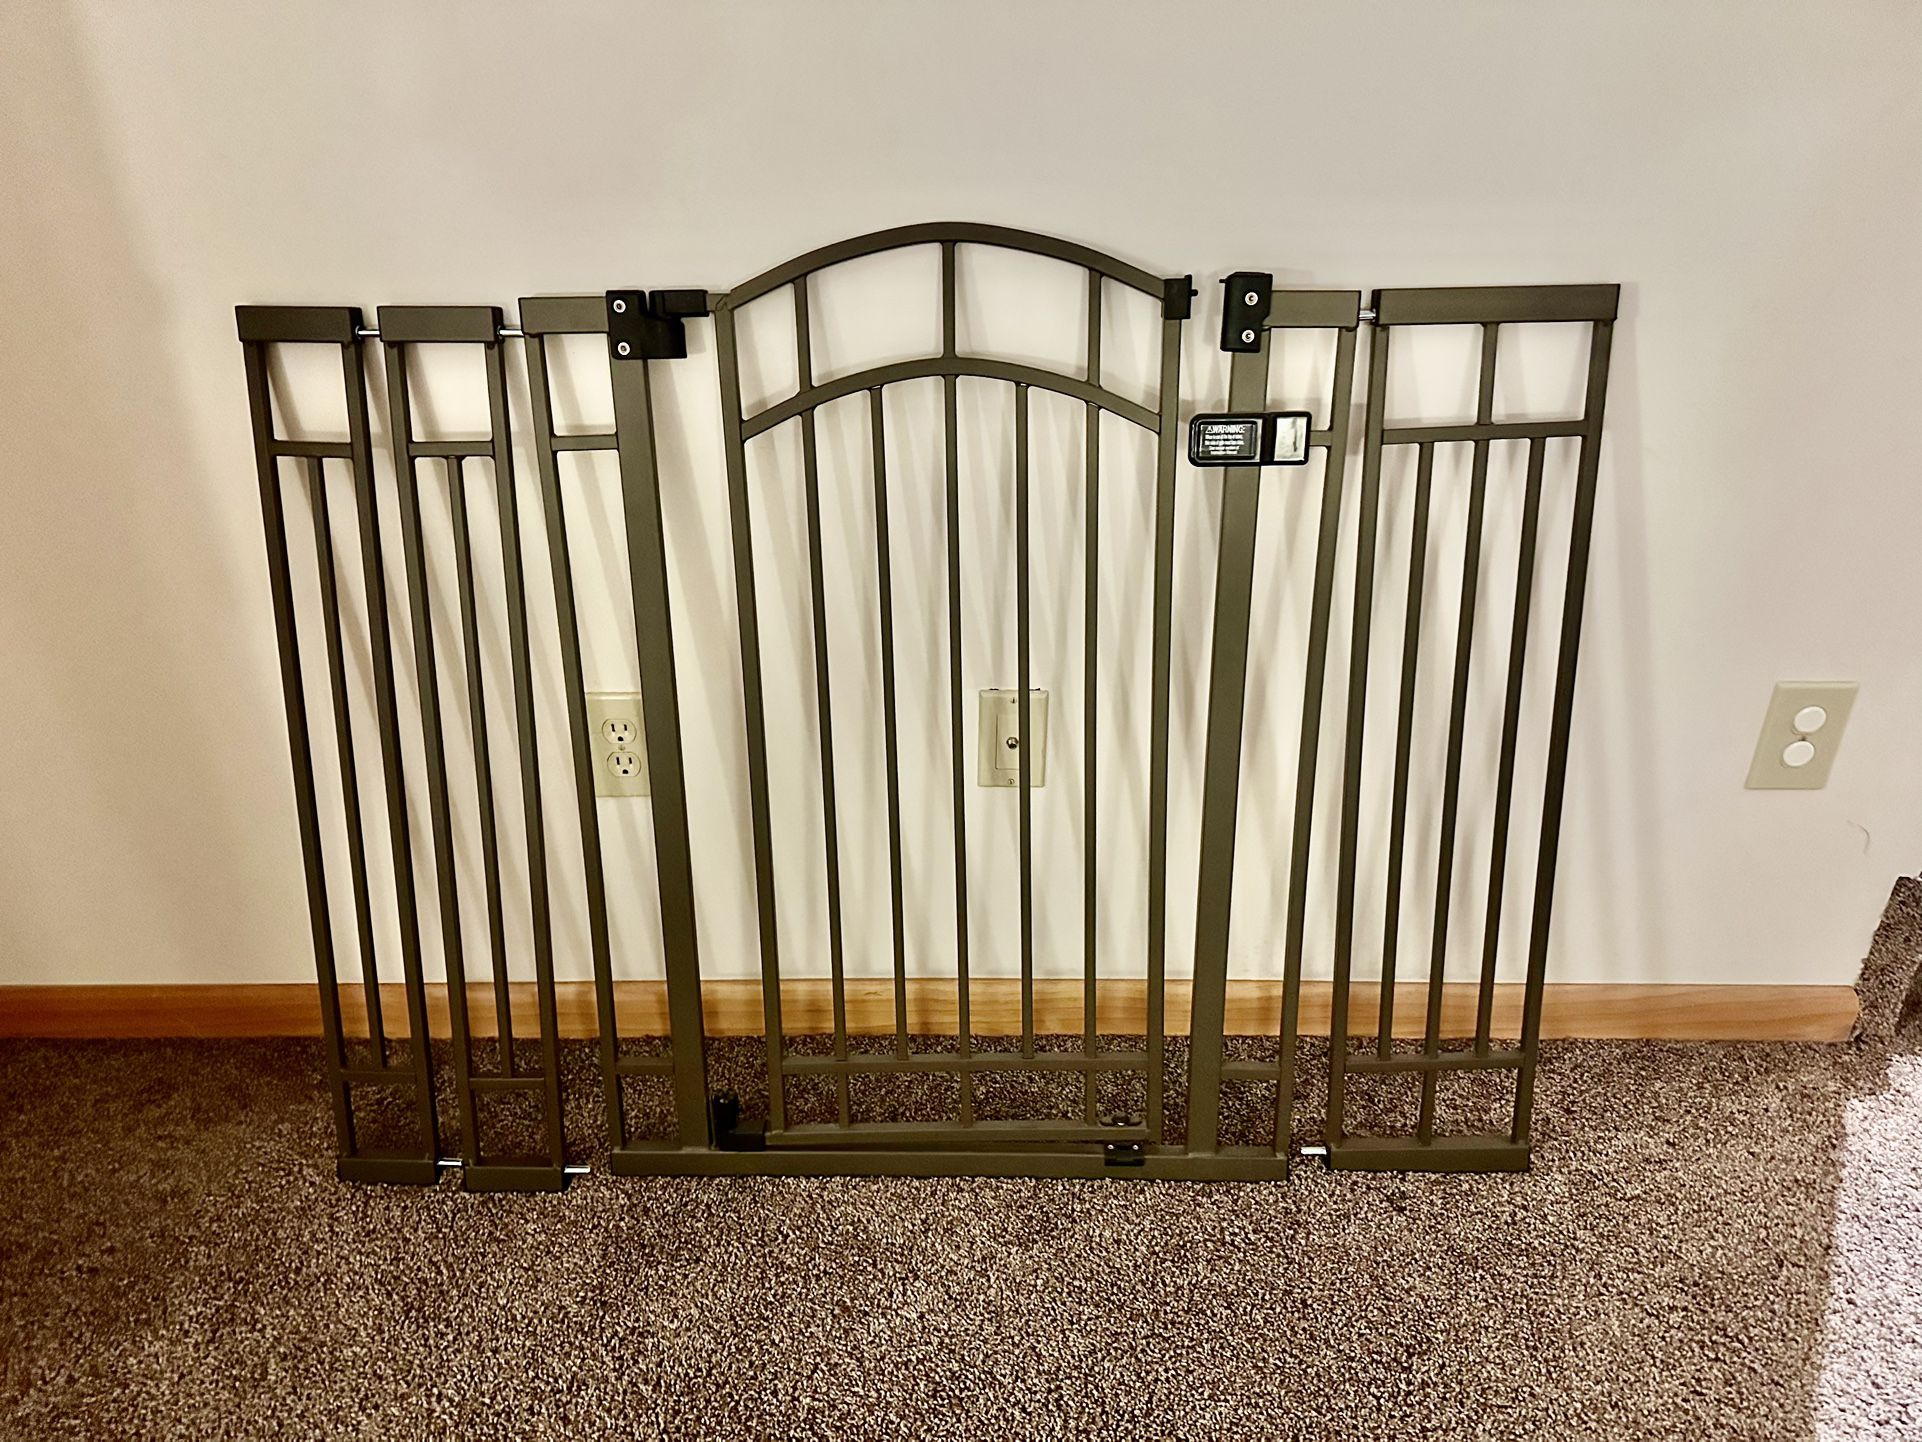 Baby Gate - Extra Wide-Excellent Condition- Heavy Duty OBO